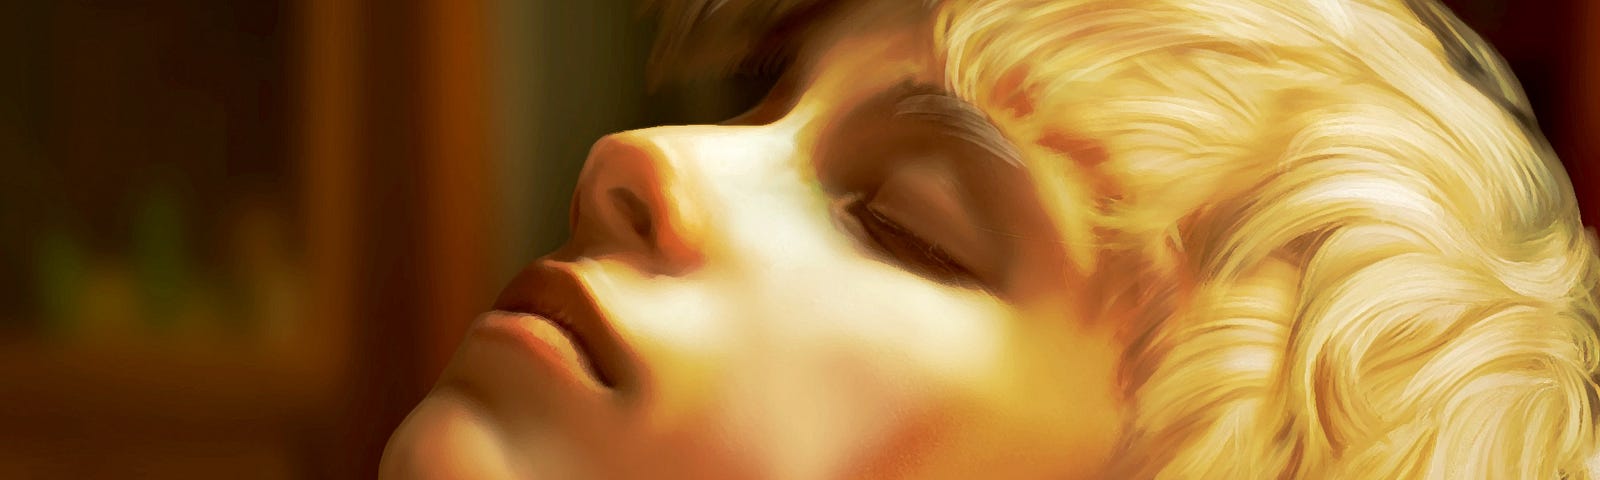 Digital painting of a profile of Eddie, a young boyish blond woman with short hair, as she lies on a chaise with her eyes closed.